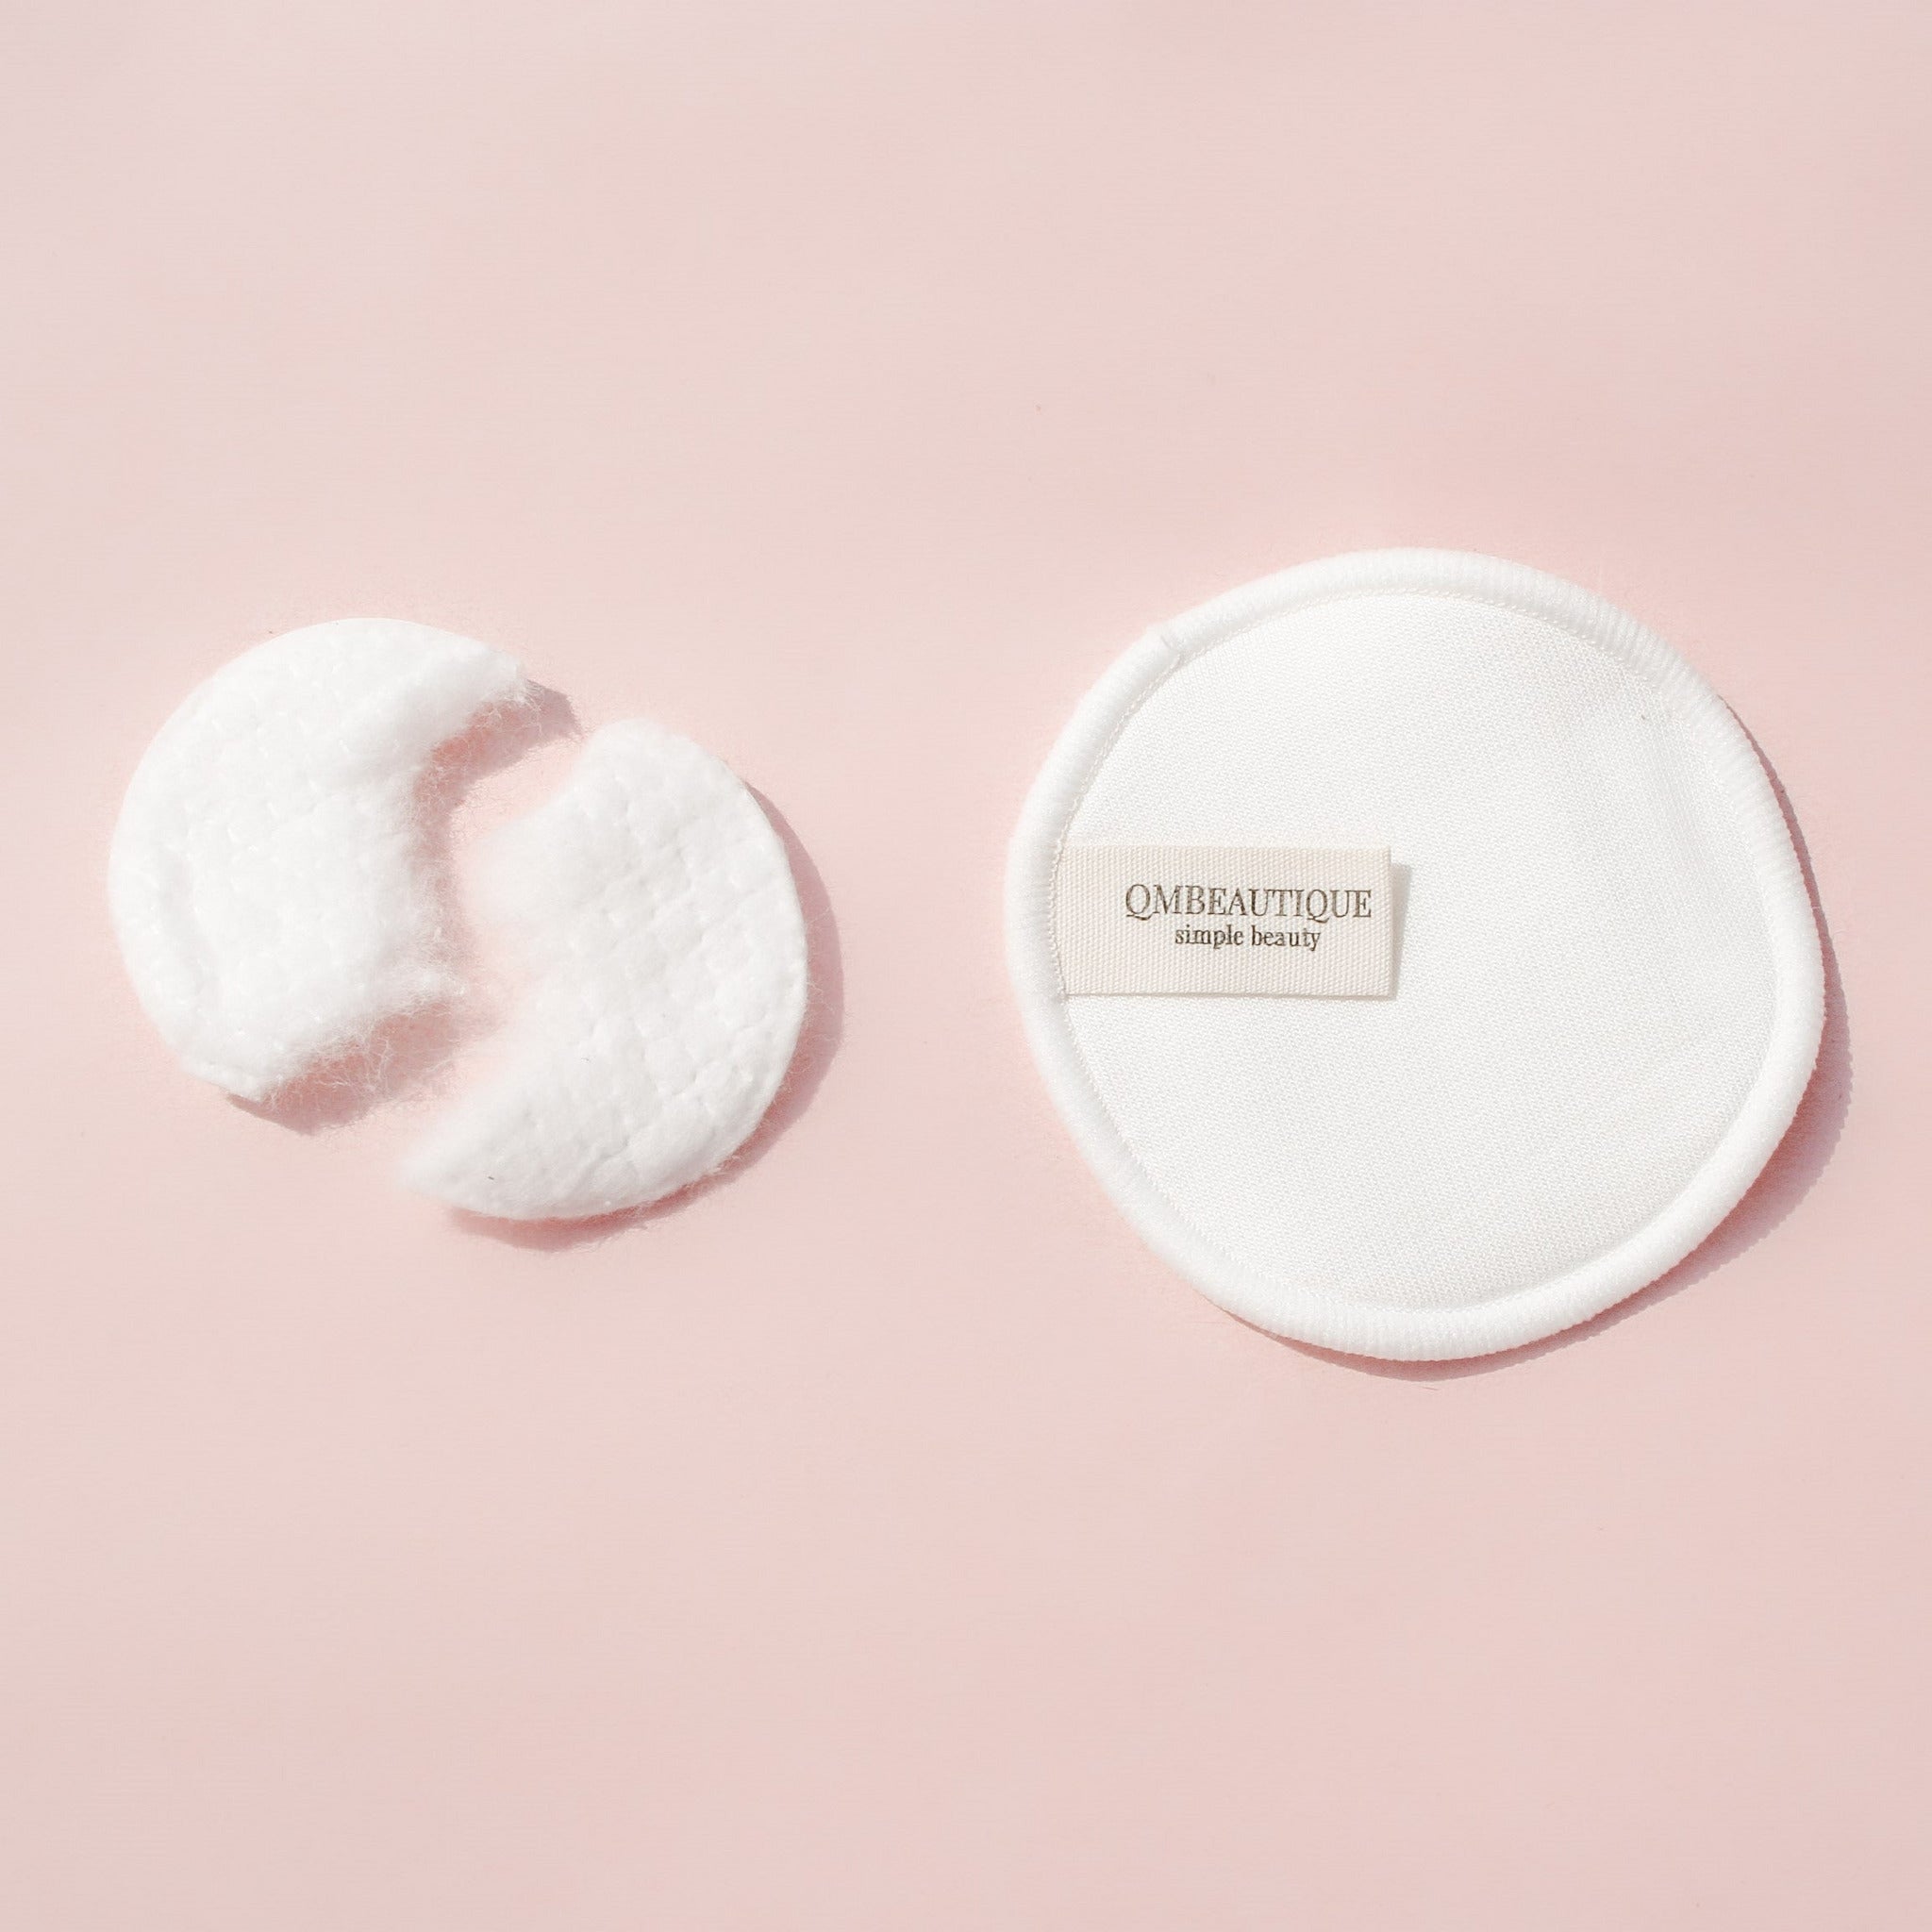 Reusable Cotton Rounds for Every Skin Type